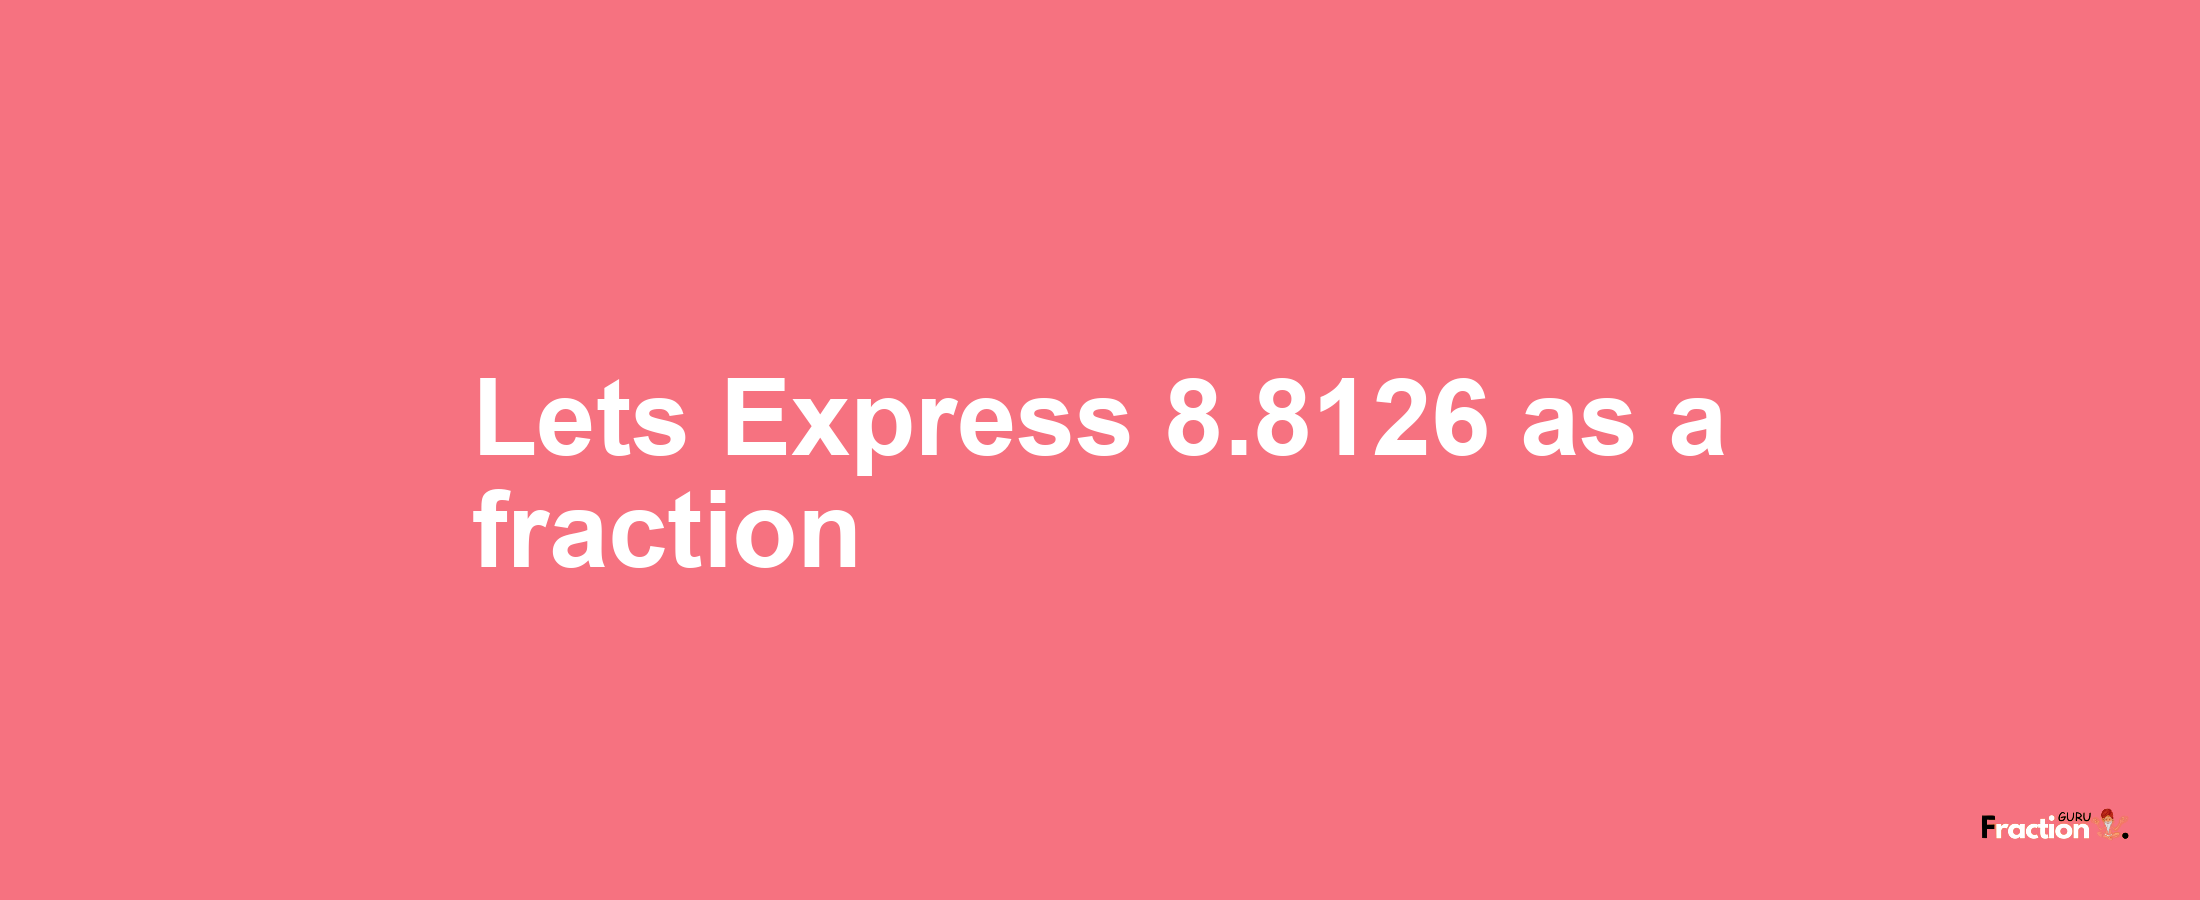 Lets Express 8.8126 as afraction